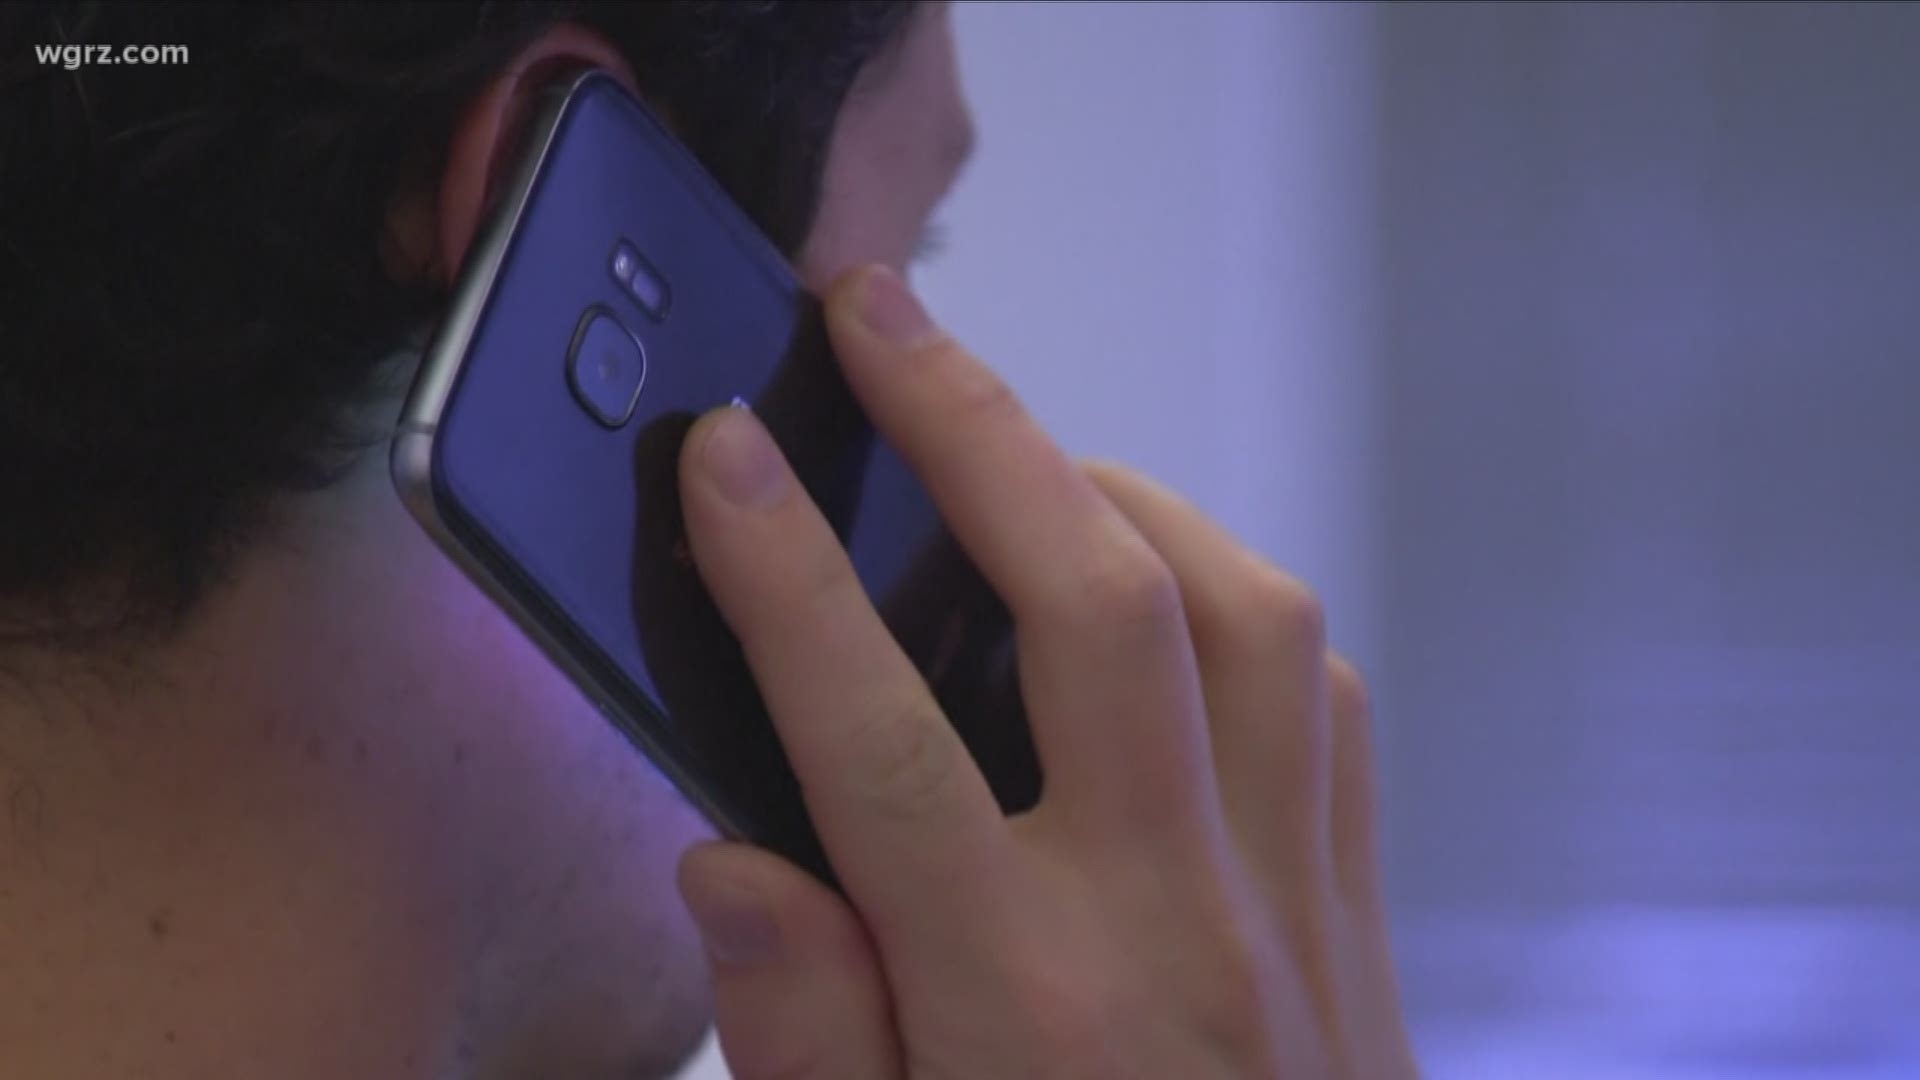 Agency accused of not investigating robocalls